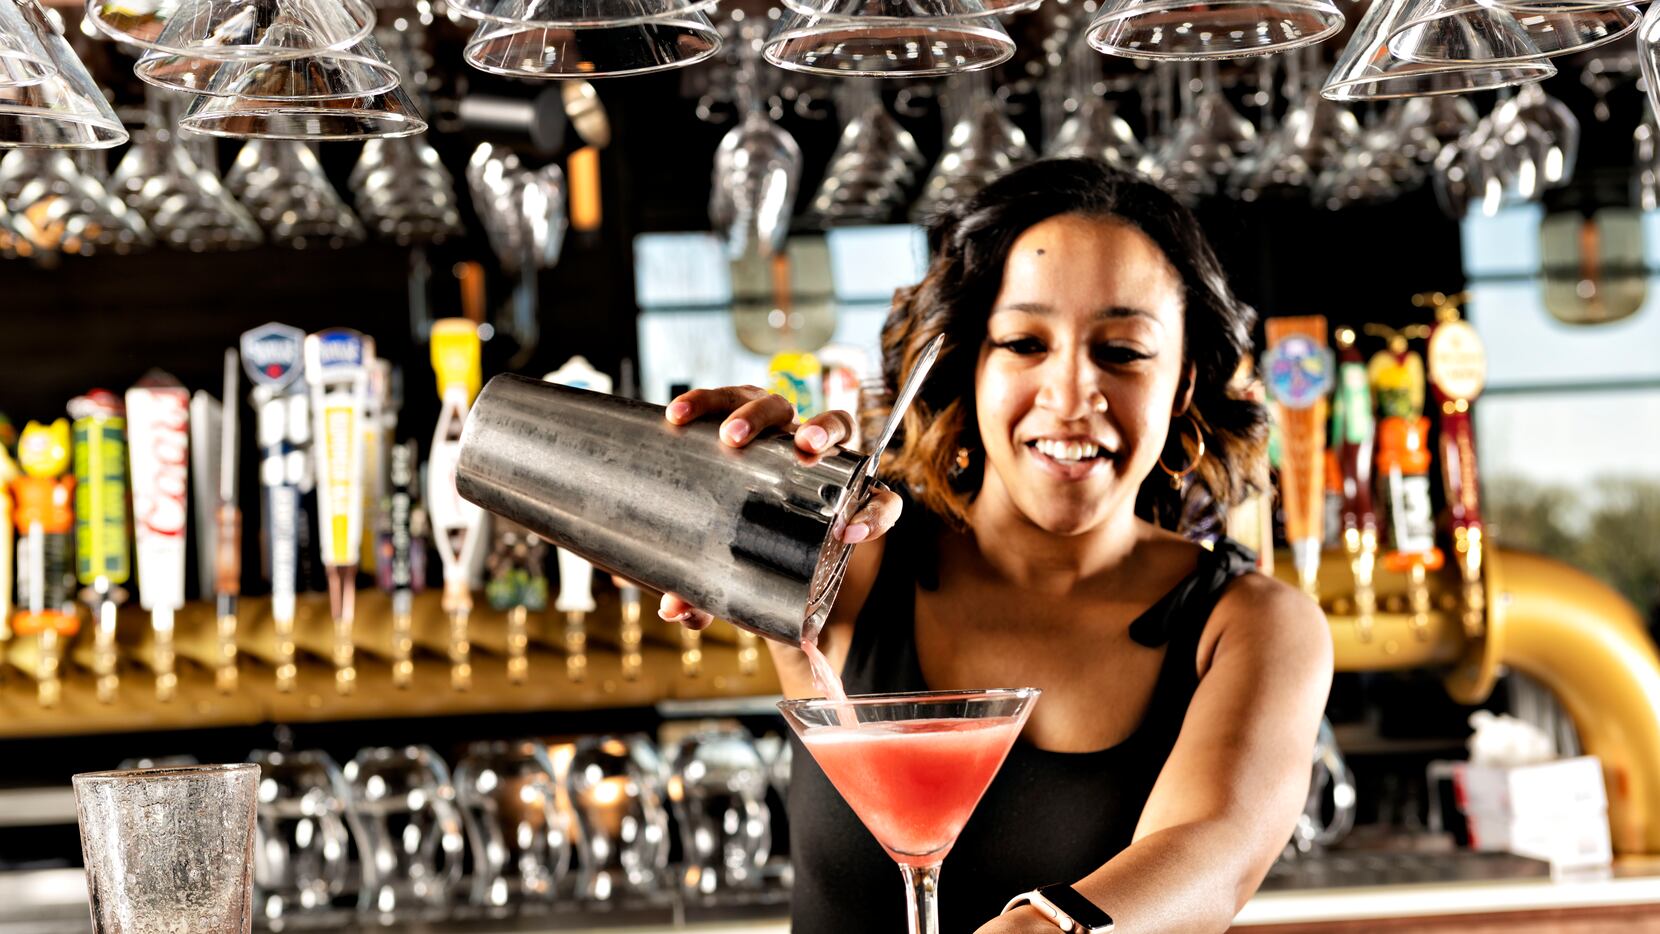 Bar Louie will be offering a Diva Martini in honor to Beyonce's visit to North Texas.